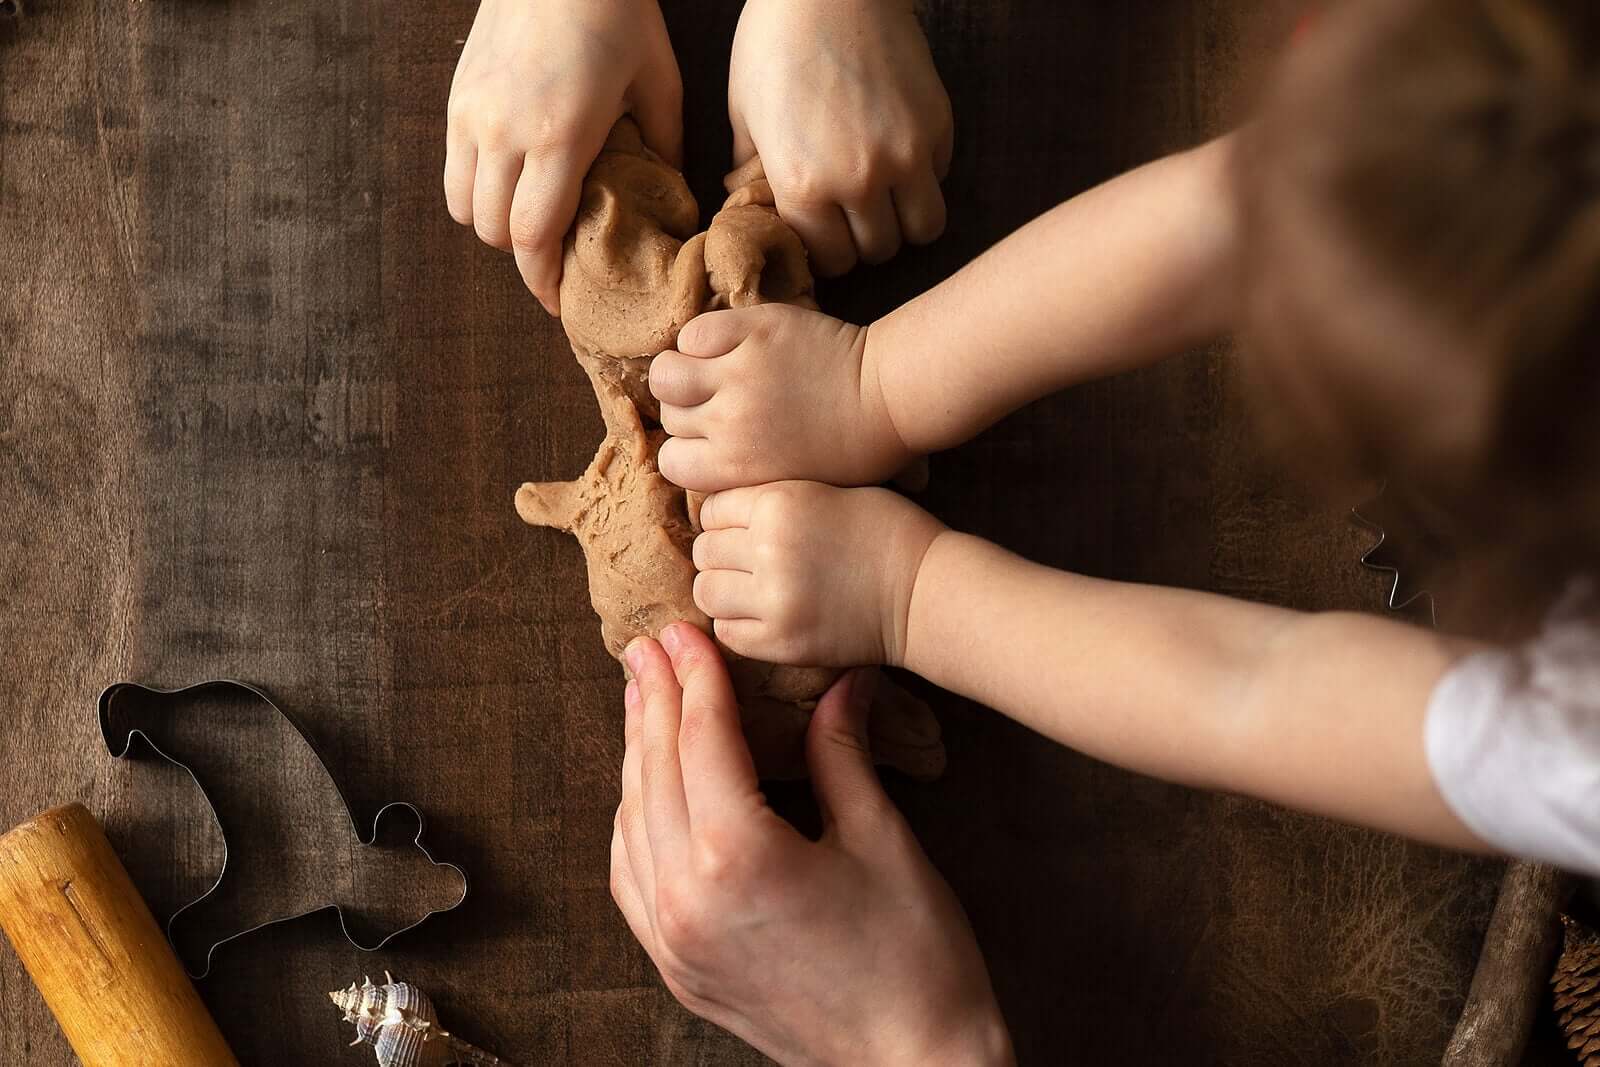 Playing with Clay Stimulates Children and Makes Them Happy!